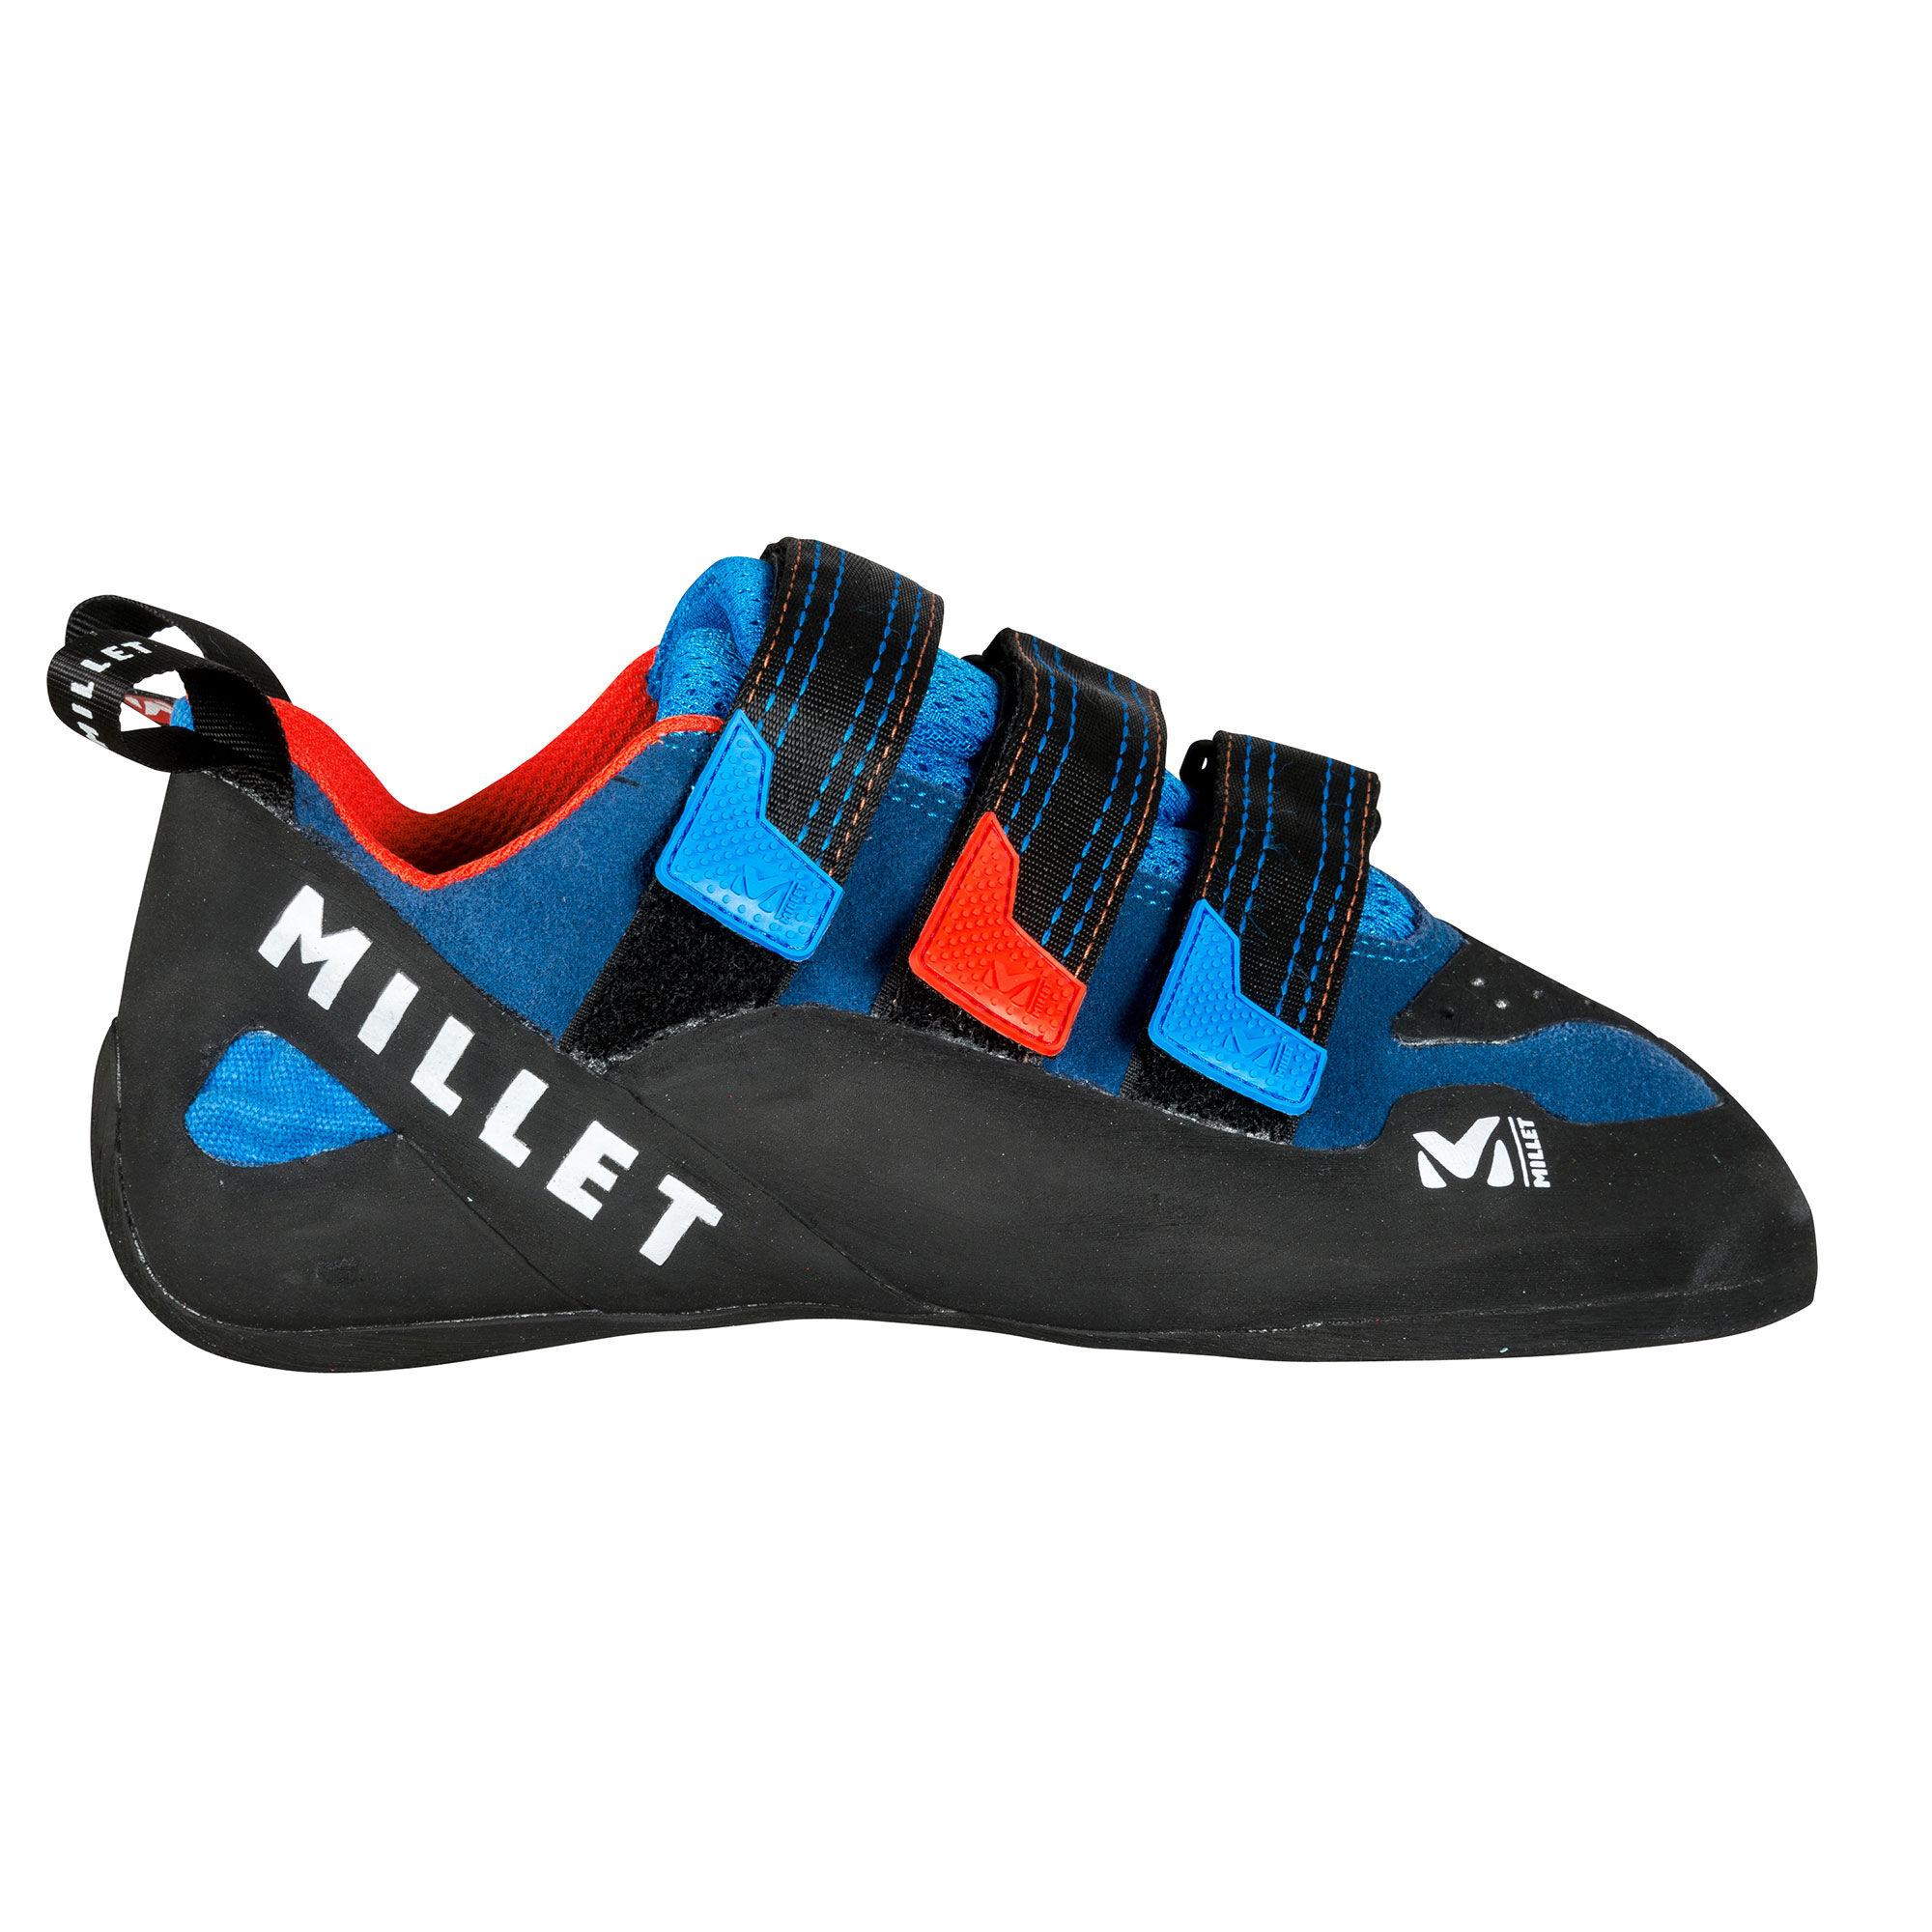 Millet Cliffhanger - Chaussons escalade homme | Hardloop